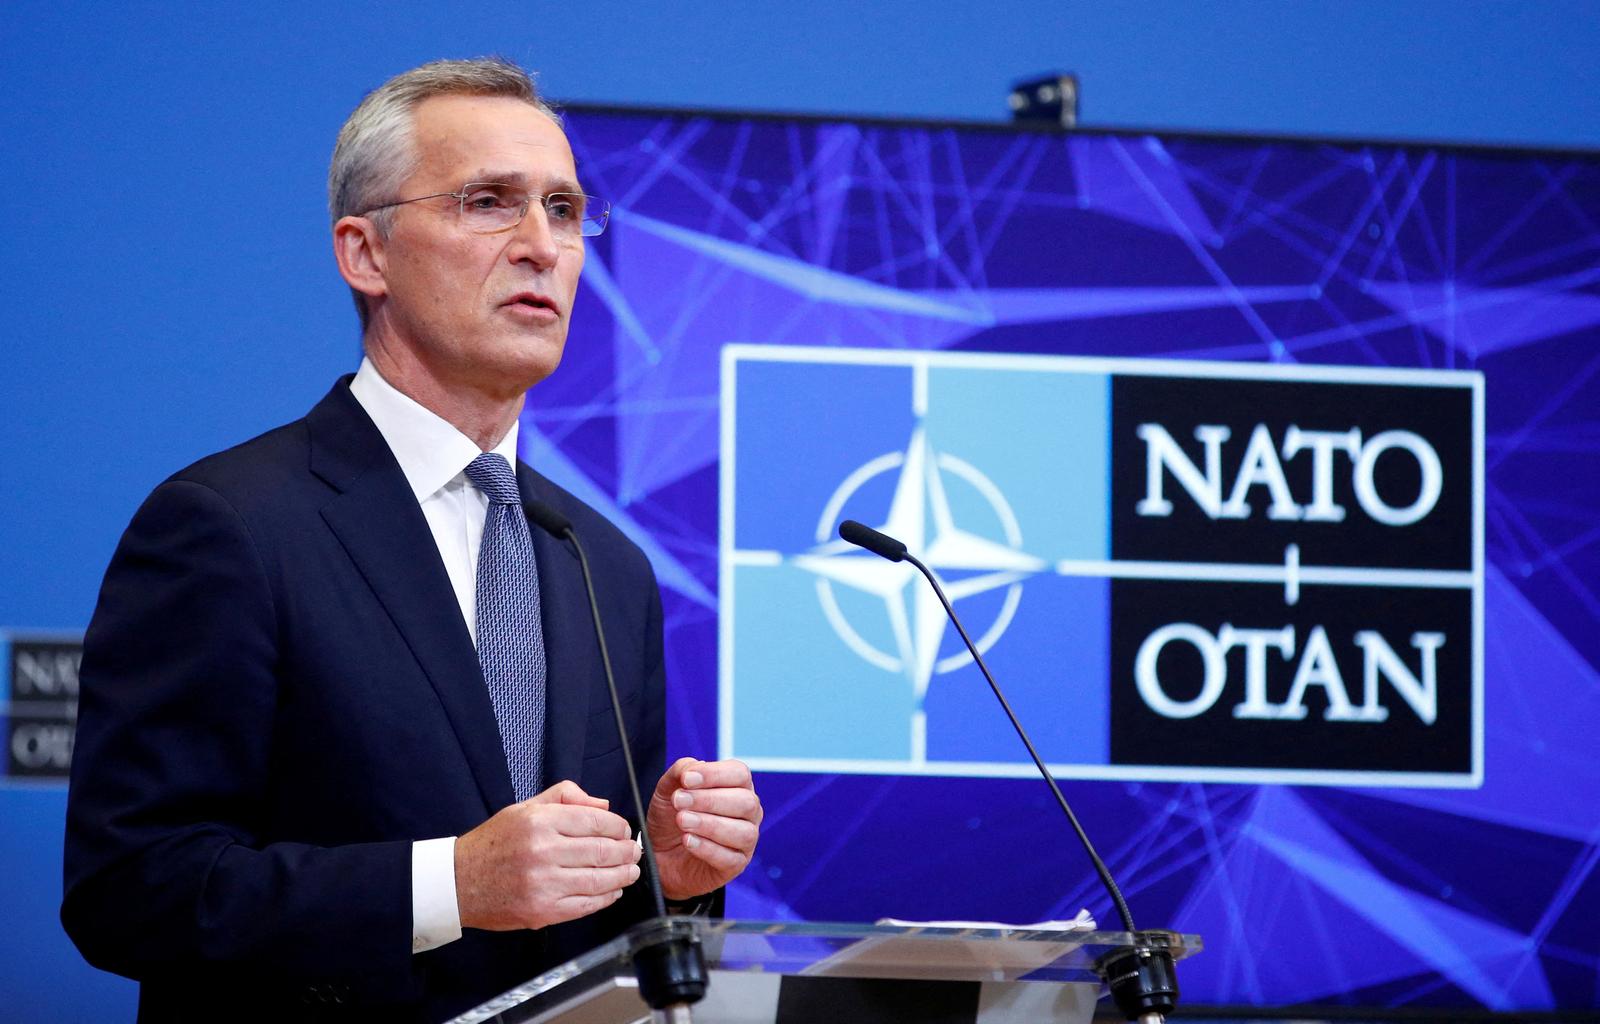 FILE PHOTO: NATO Secretary General Jens Stoltenberg speaks during a news conference at the Alliance's headquarters in Brussels, Belgium January 12, 2022. REUTERS/Johanna Geron/File Photo Photo: JOHANNA GERON/REUTERS